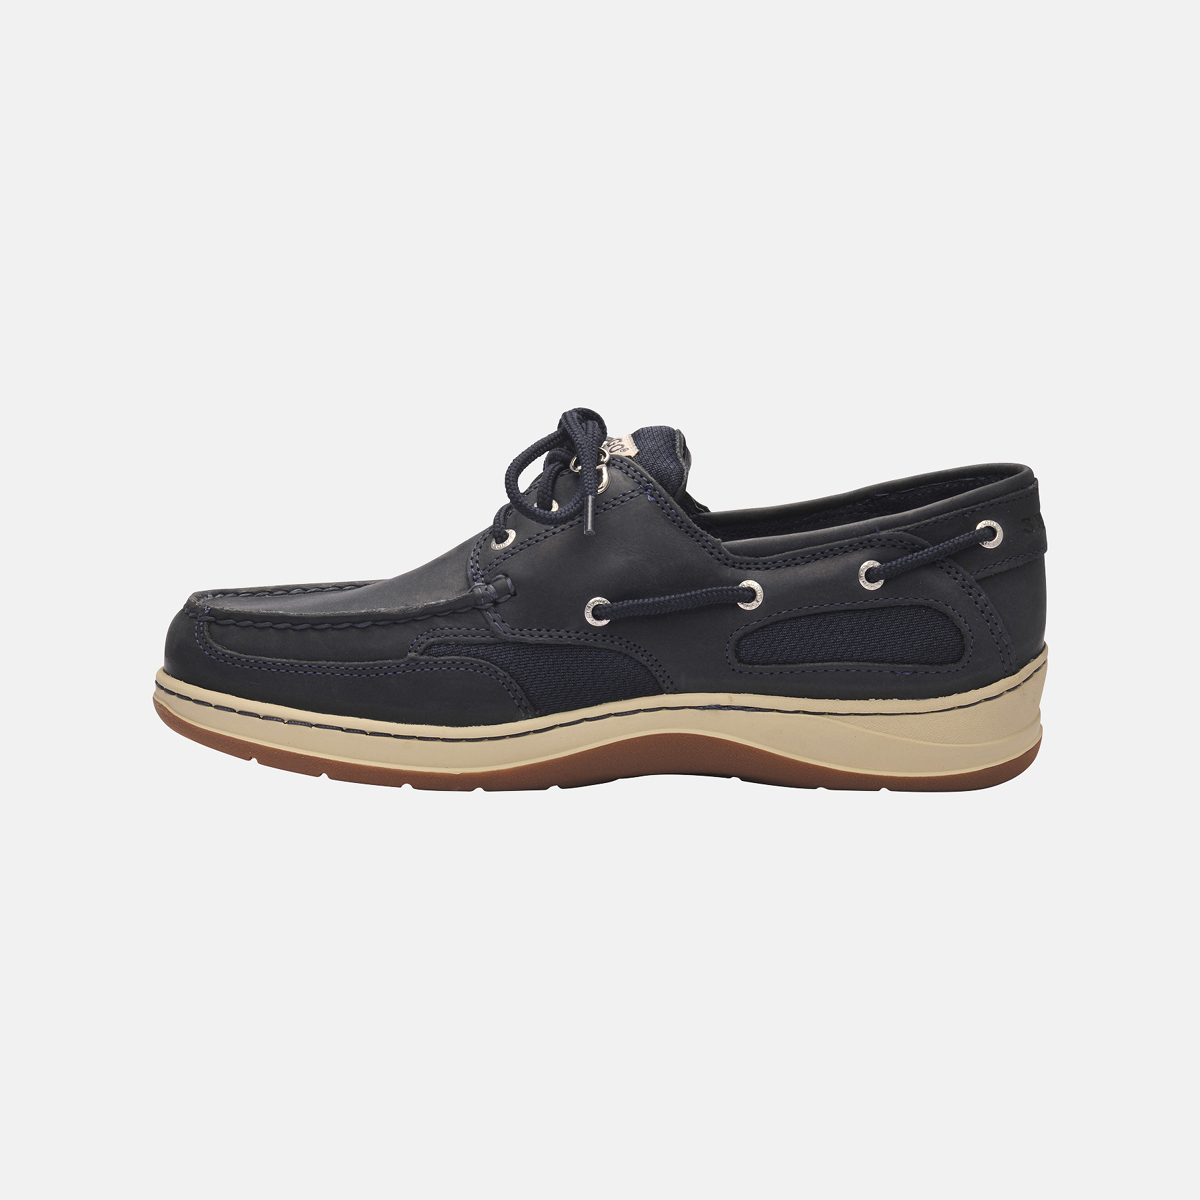 Sebago Clovehitch II chaussures bateau homme blue navy leather, taille 45 (US 11)